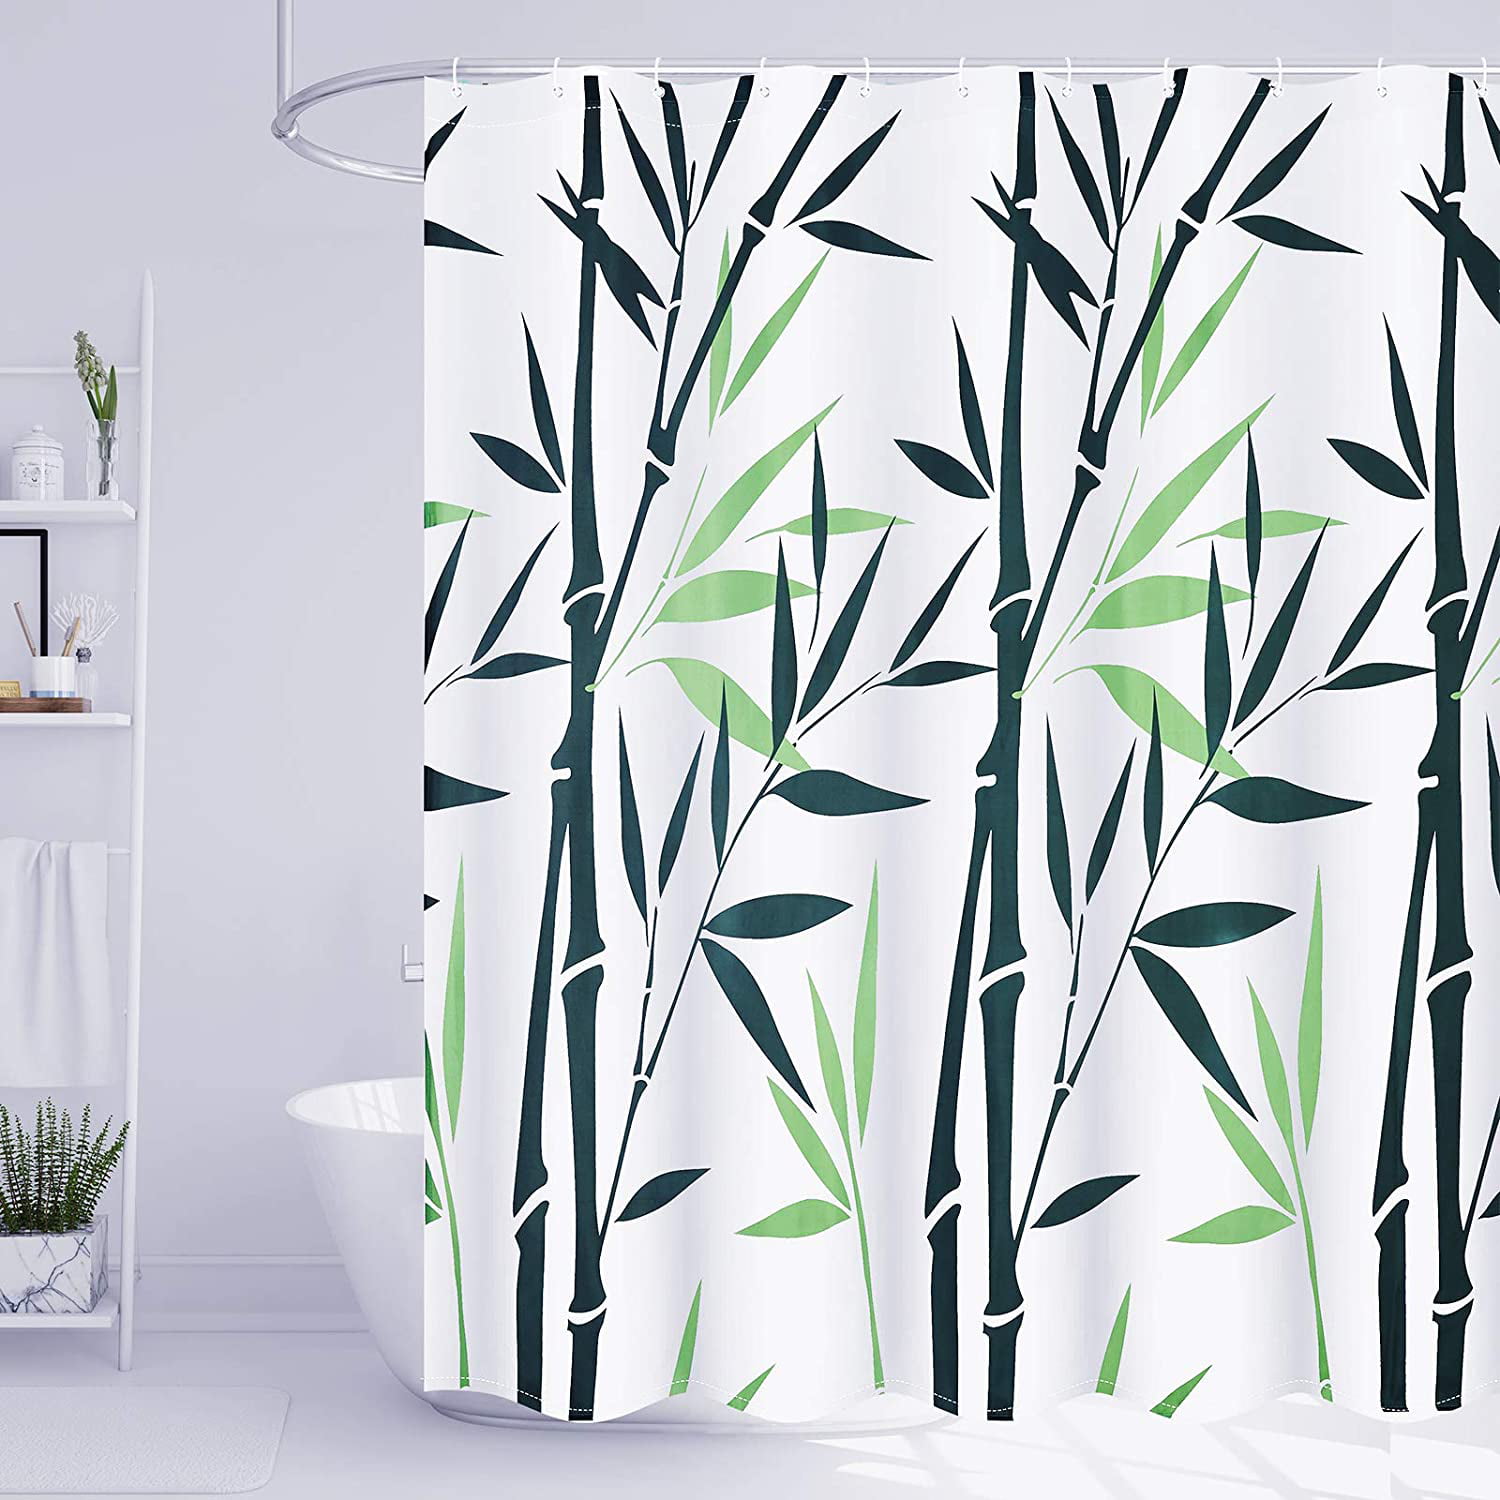 Plant Shower Curtain Green Bamboo Print, Shower Curtain Made From Bamboo